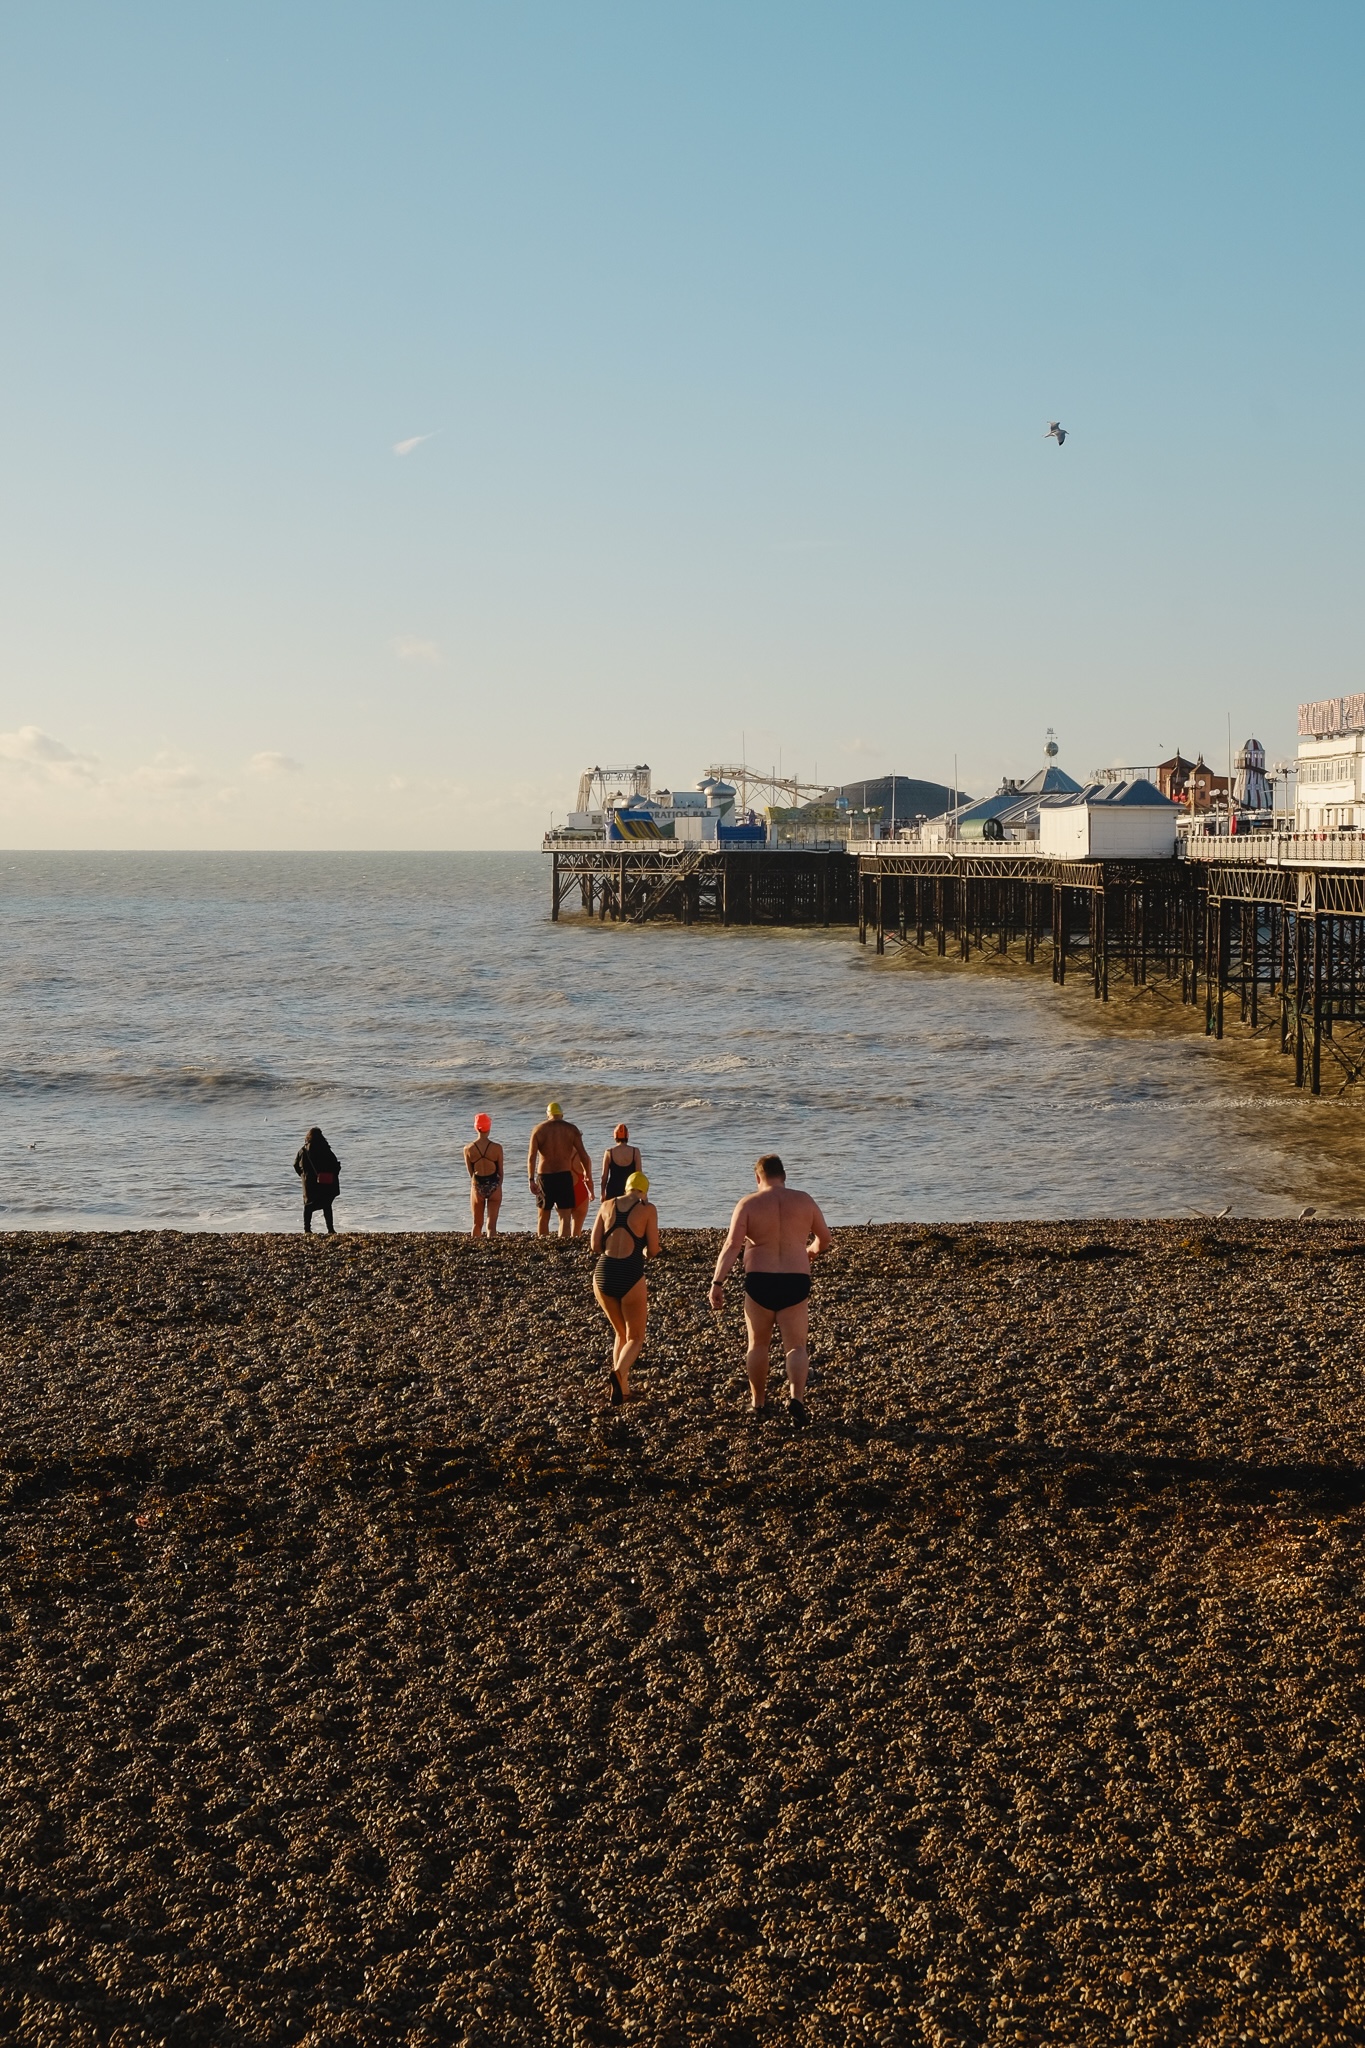 A group of swimmers make their way to the sea with the pier to the right, another person in a warm coat is standing looking into the distance